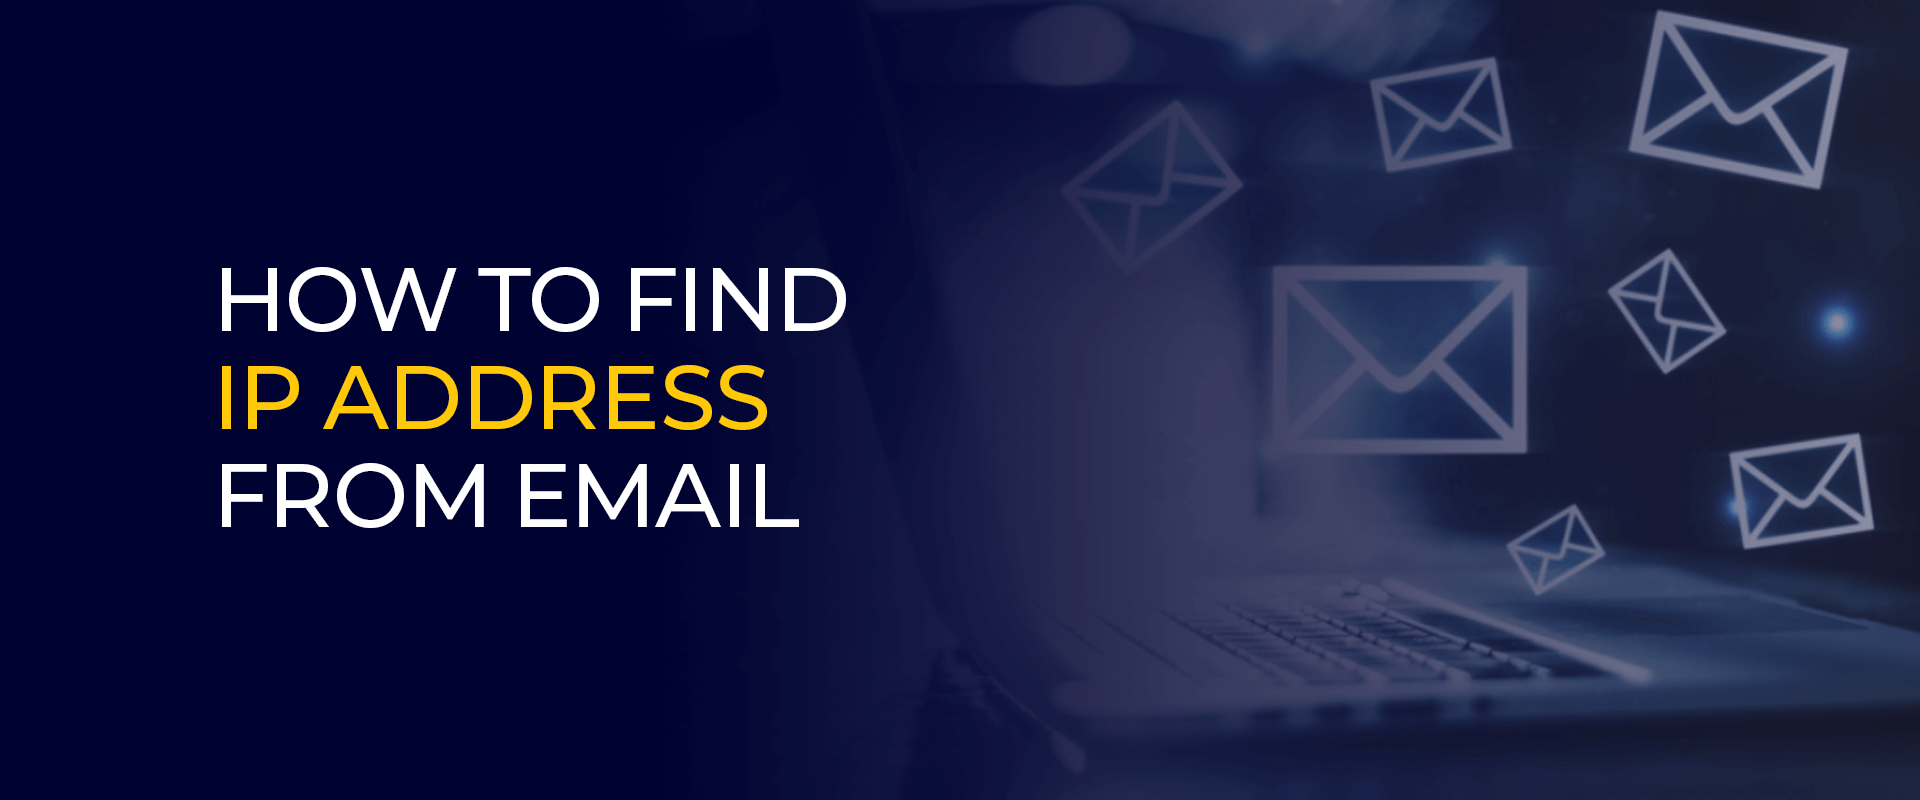 How to find ip address from email